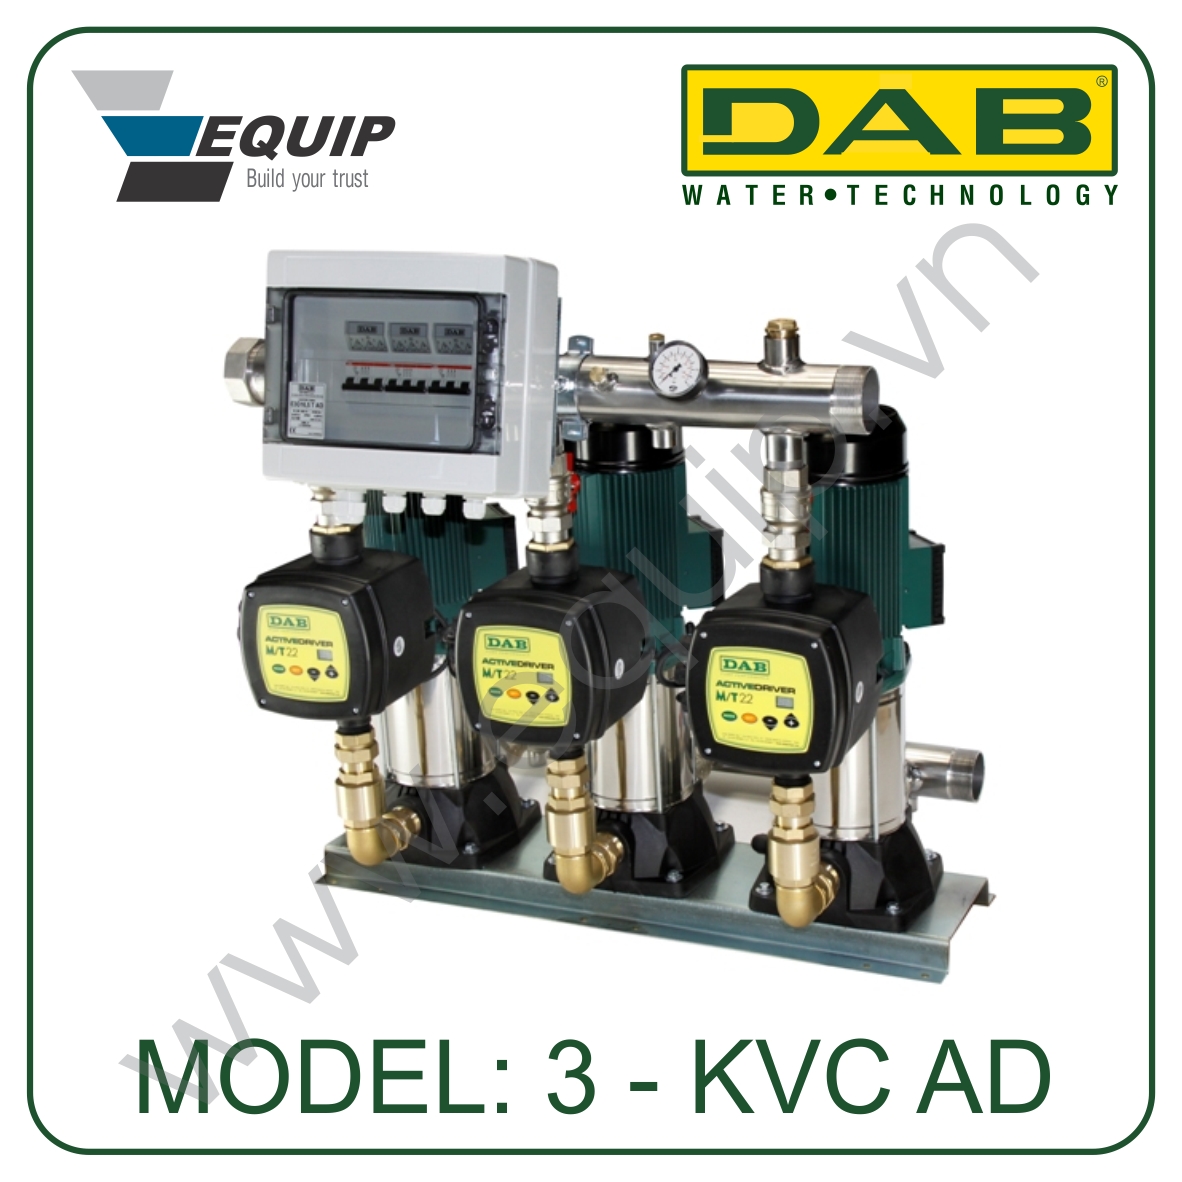 Pump sets with Active Driver